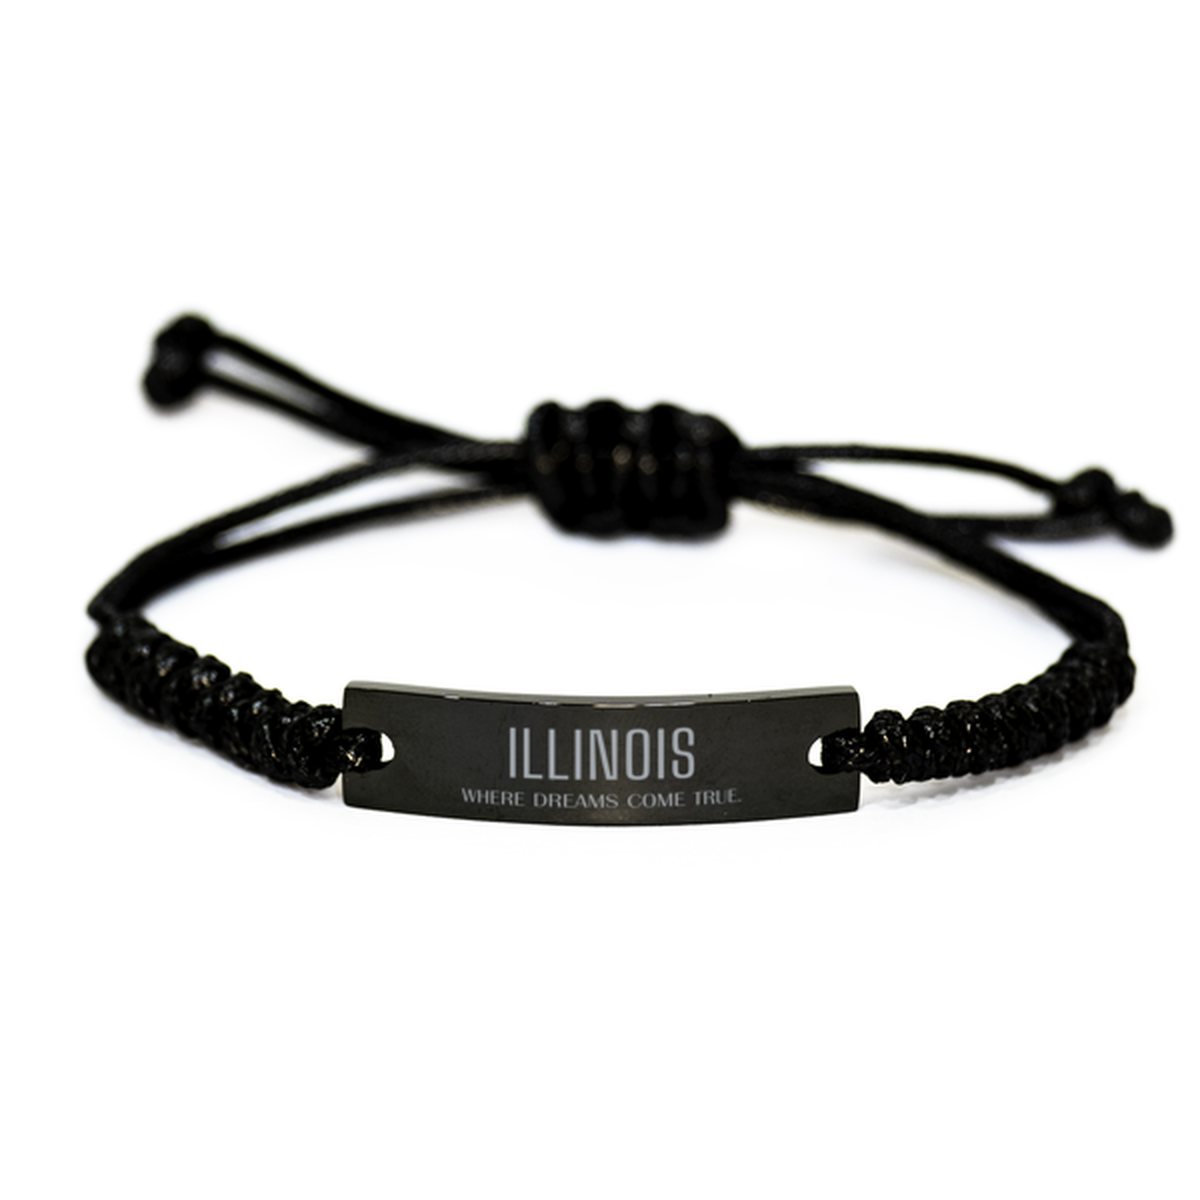 Love Illinois State Black Rope Bracelet, Illinois Where dreams come true, Birthday Inspirational Gifts For Illinois Men, Women, Friends